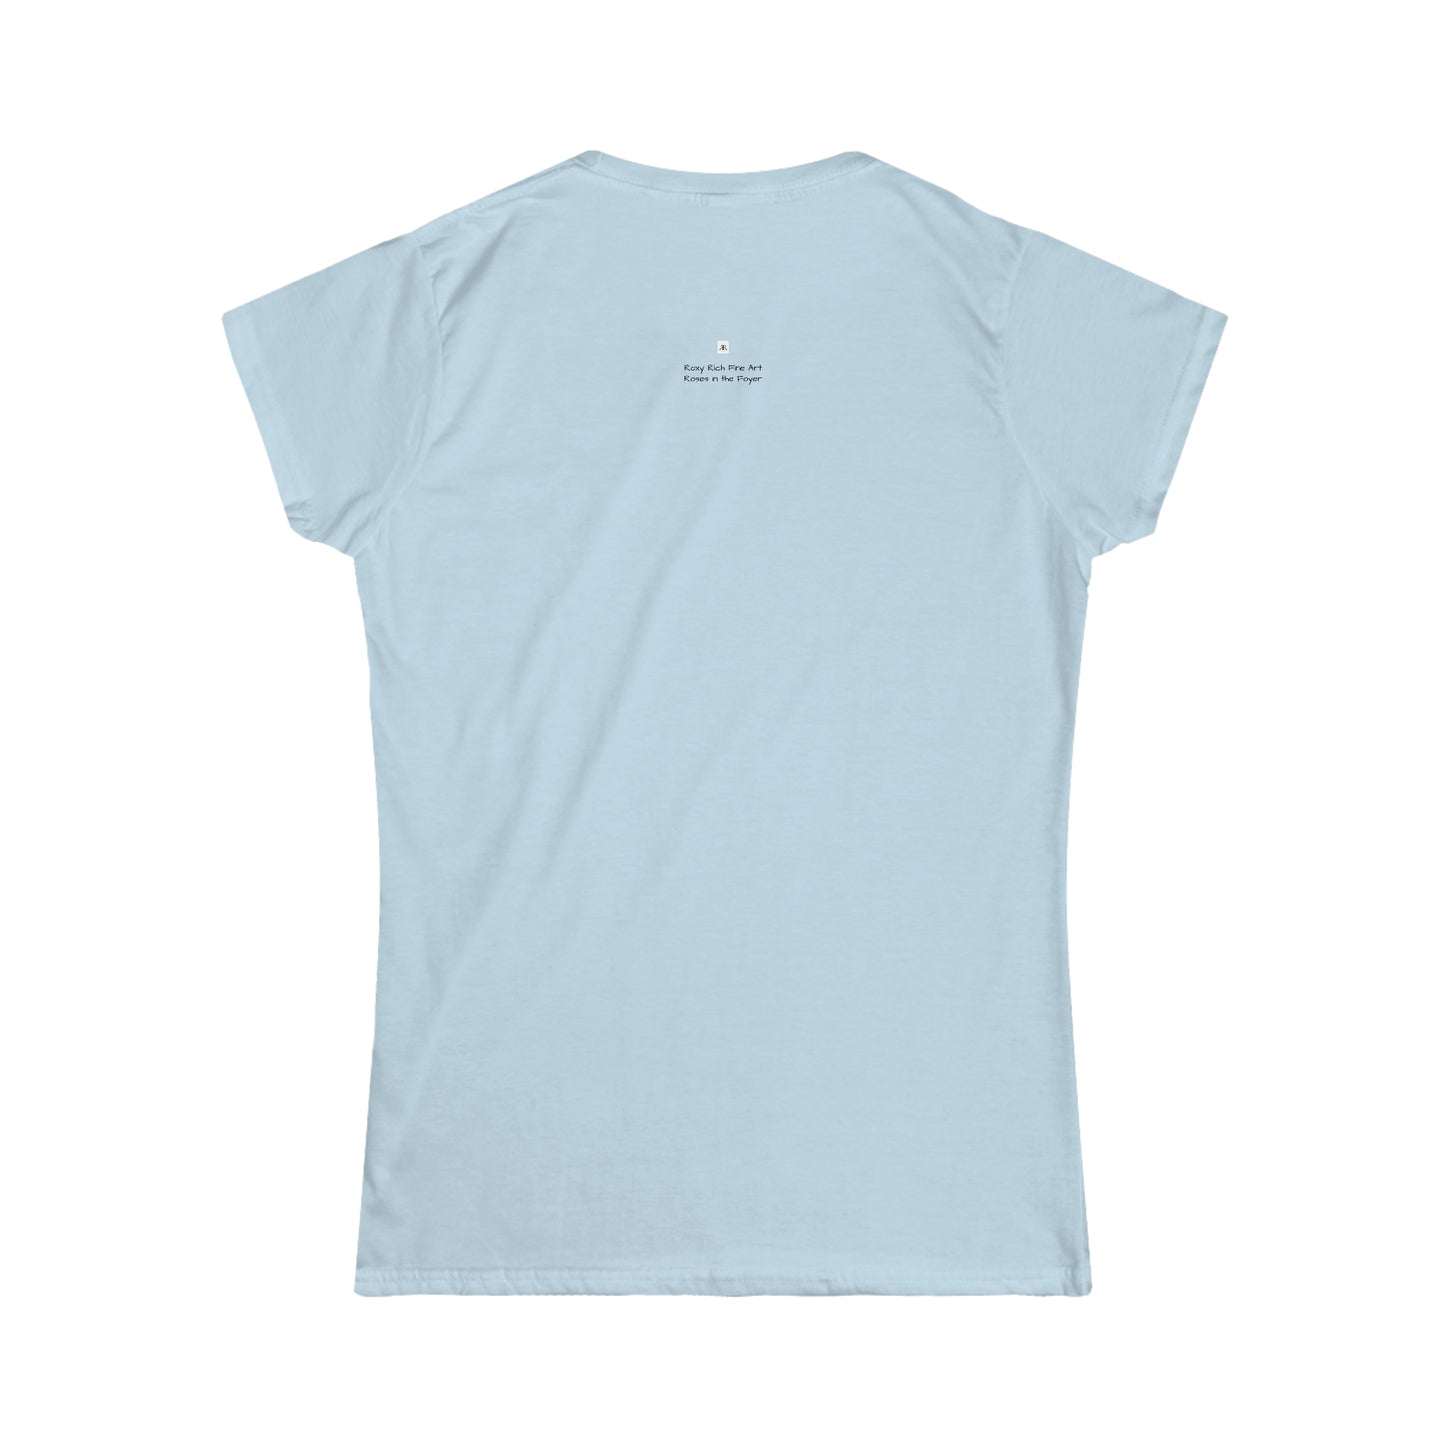 Roses in the Foyer Women's Softstyle  Semi-Fitted Tee